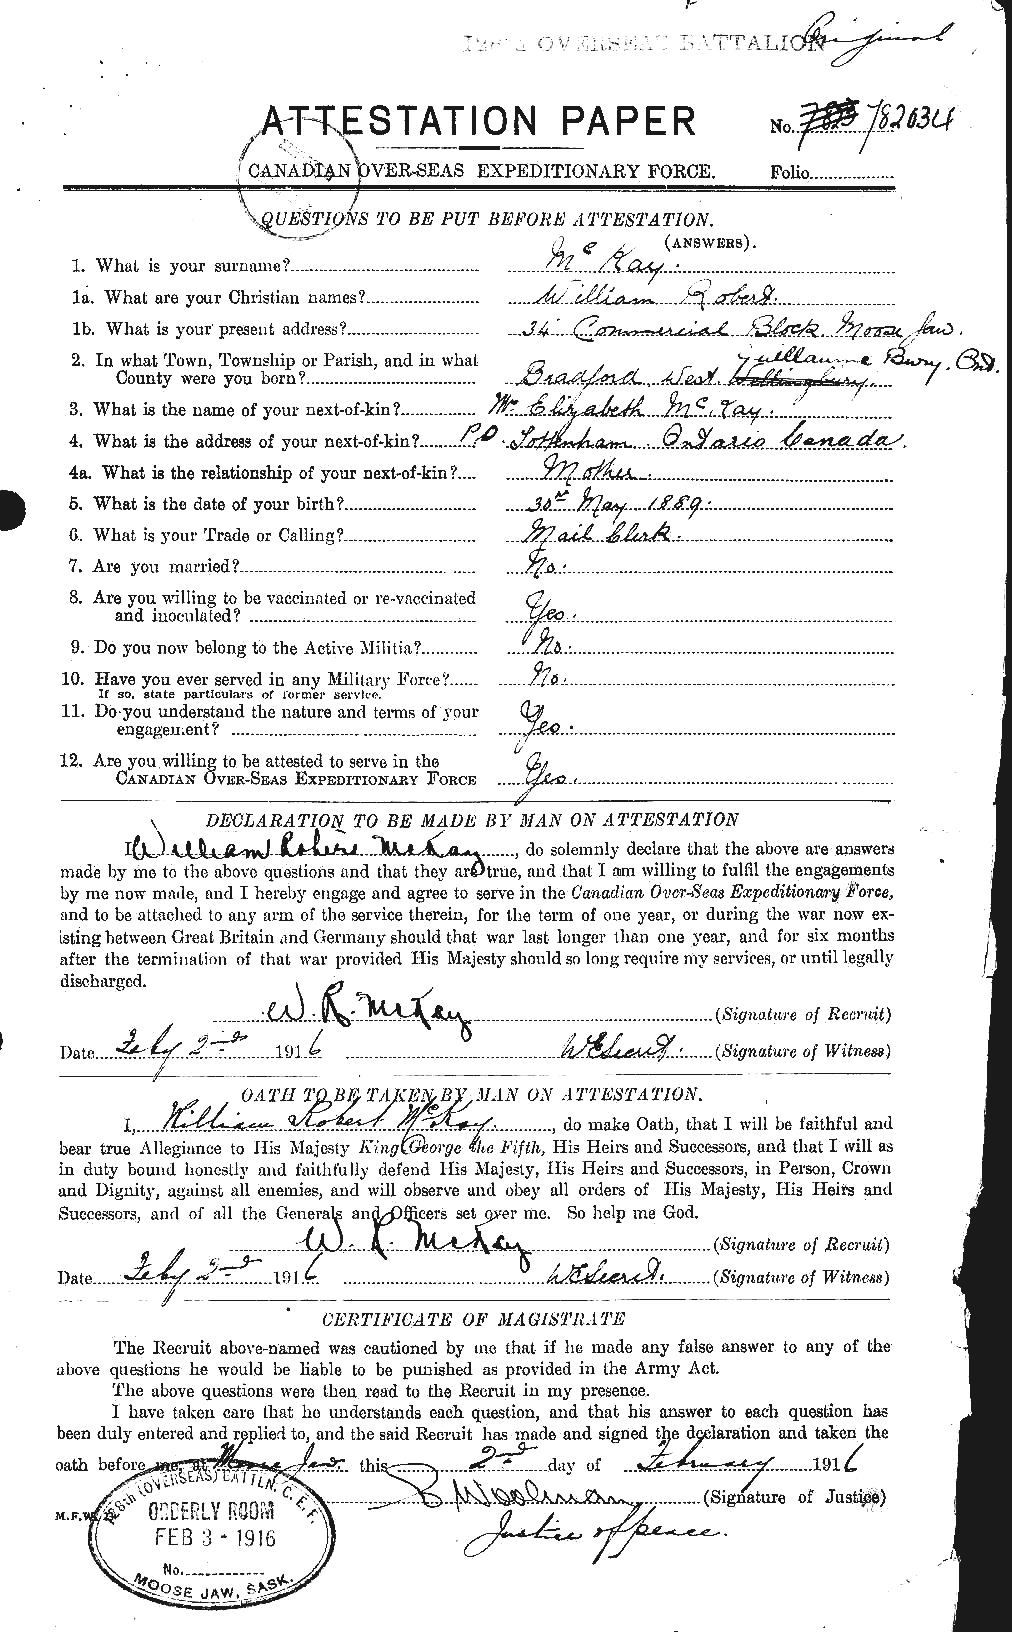 Personnel Records of the First World War - CEF 530314a